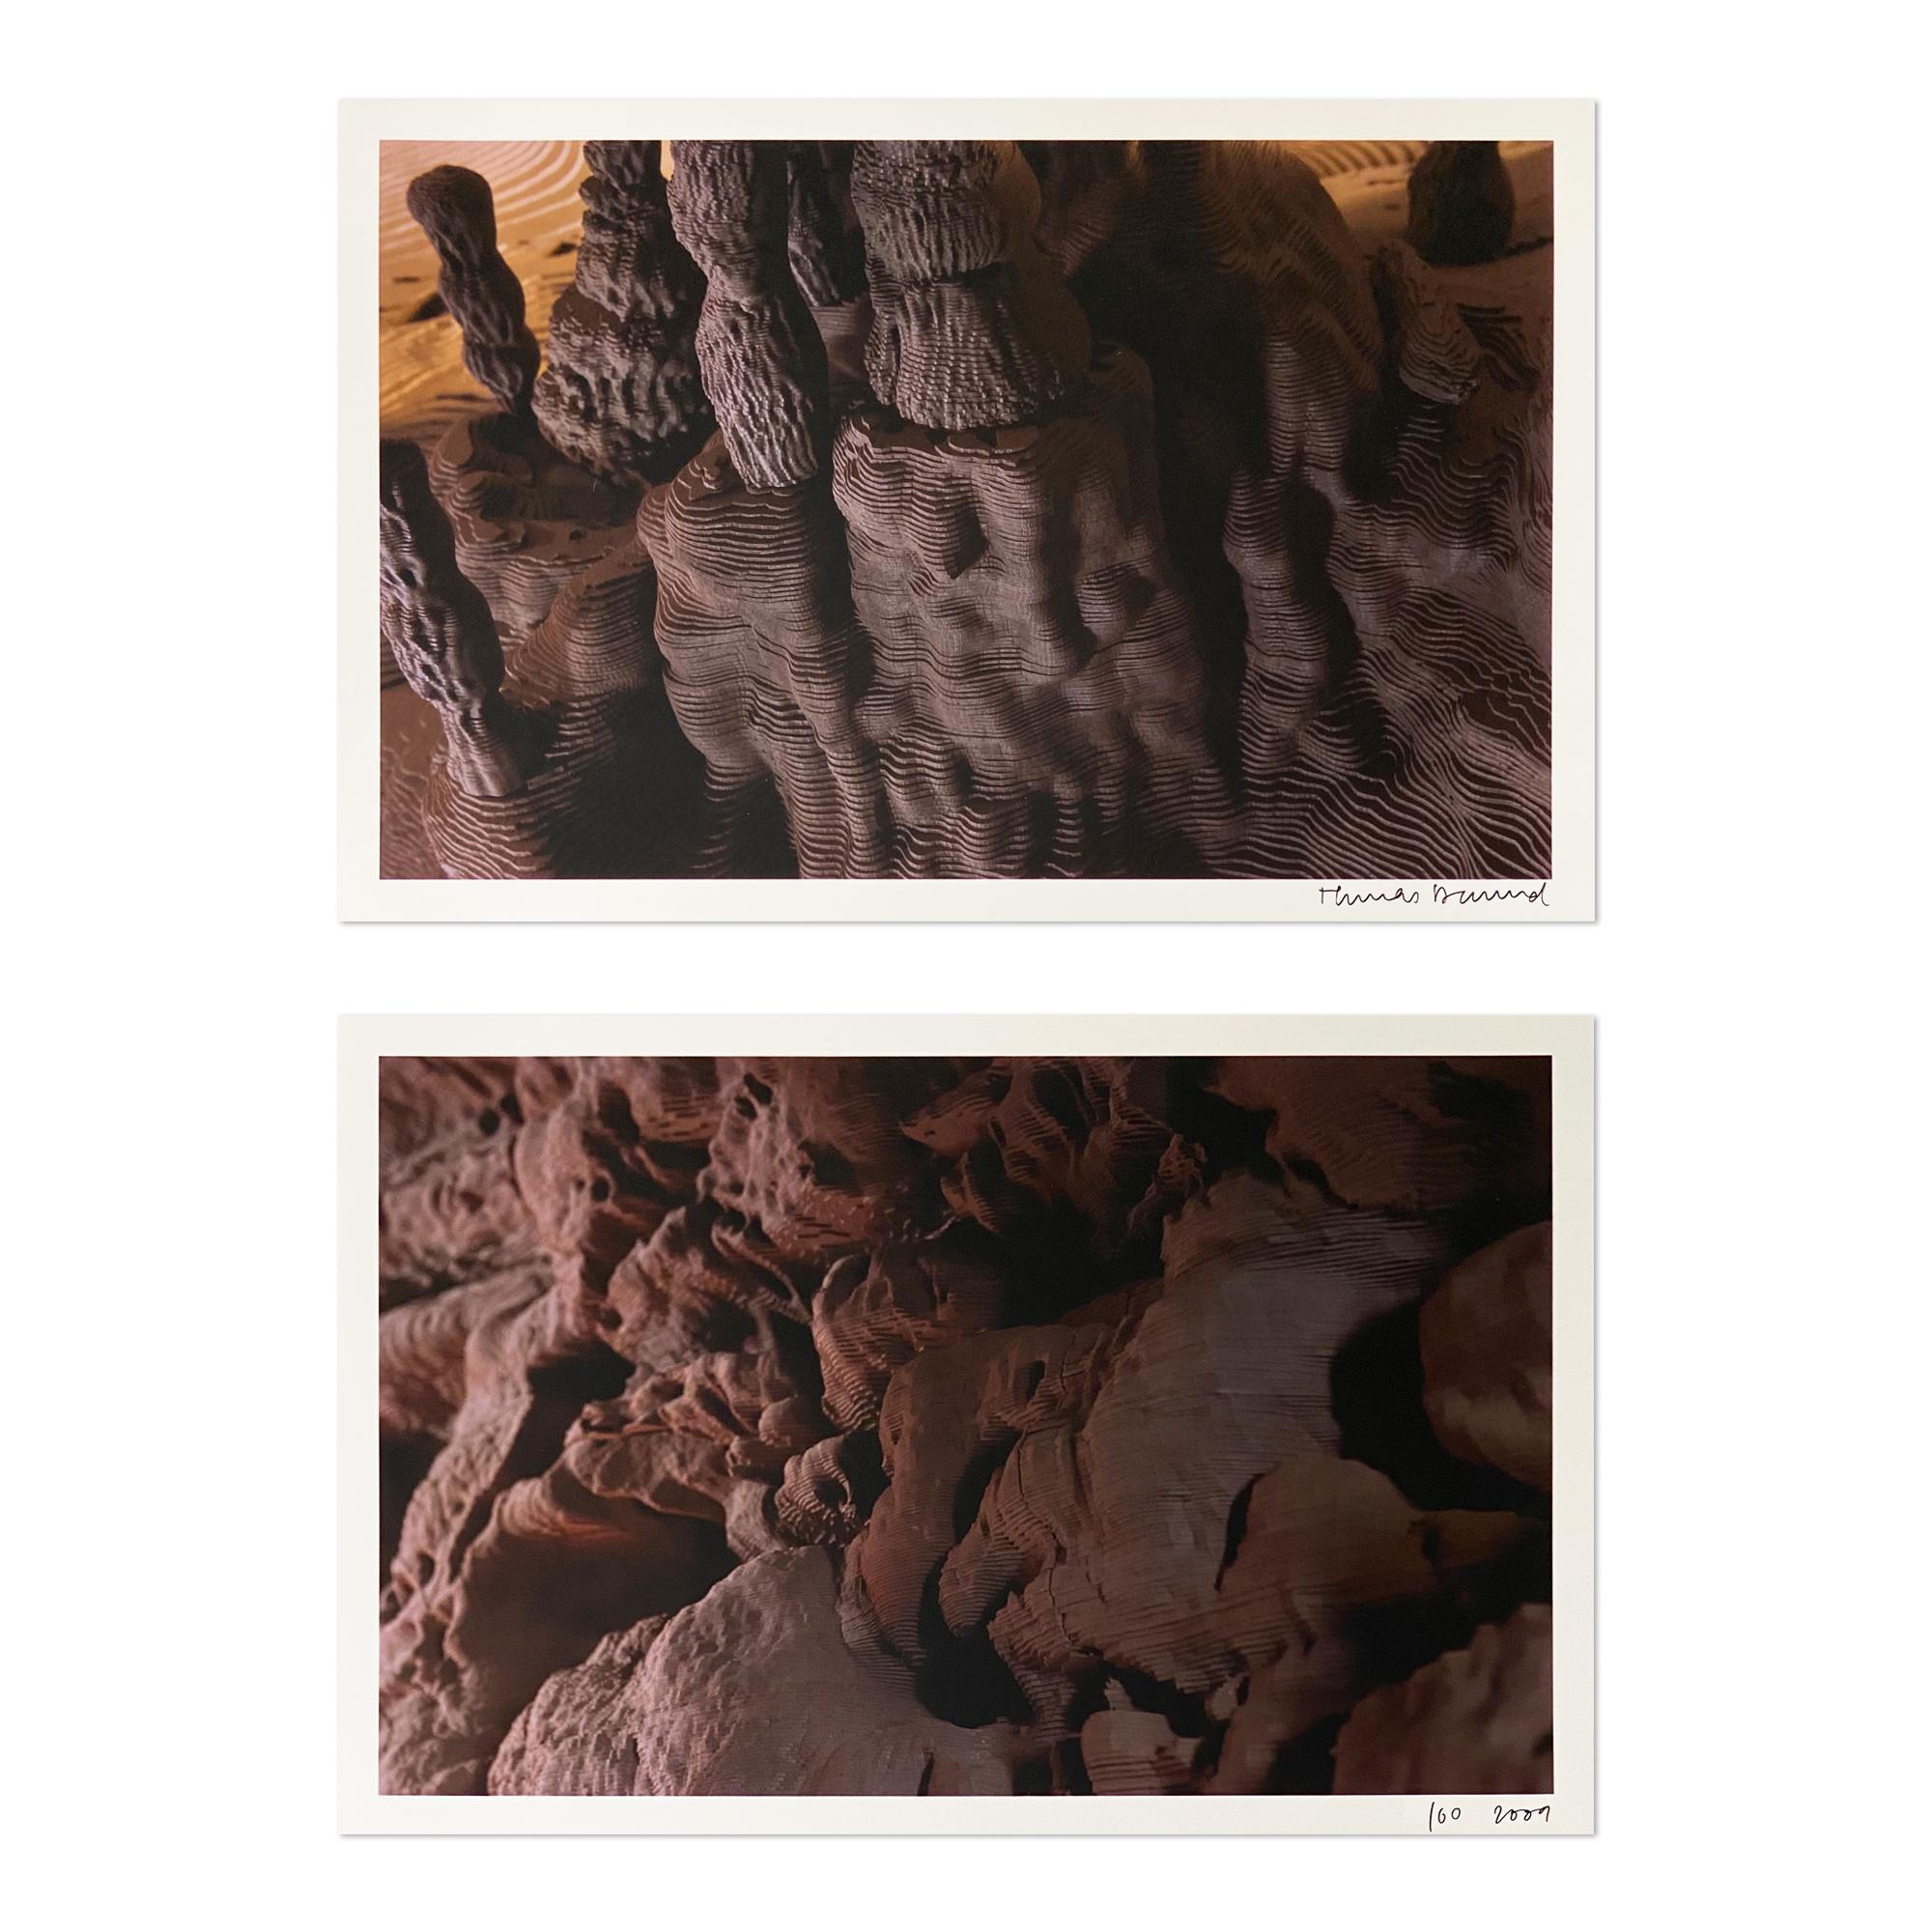 Thomas Demand (German, born 1964)
Grotto (from Catalogue Serpentine Gallery, Collector’s Edition), 2006/2009
Medium: Set of 2 cibachrome prints, exhibition catalogue
Dimensions: each 20.6 x 31.5 cm
Edition of 60 + 20 AP: One print signed, one print